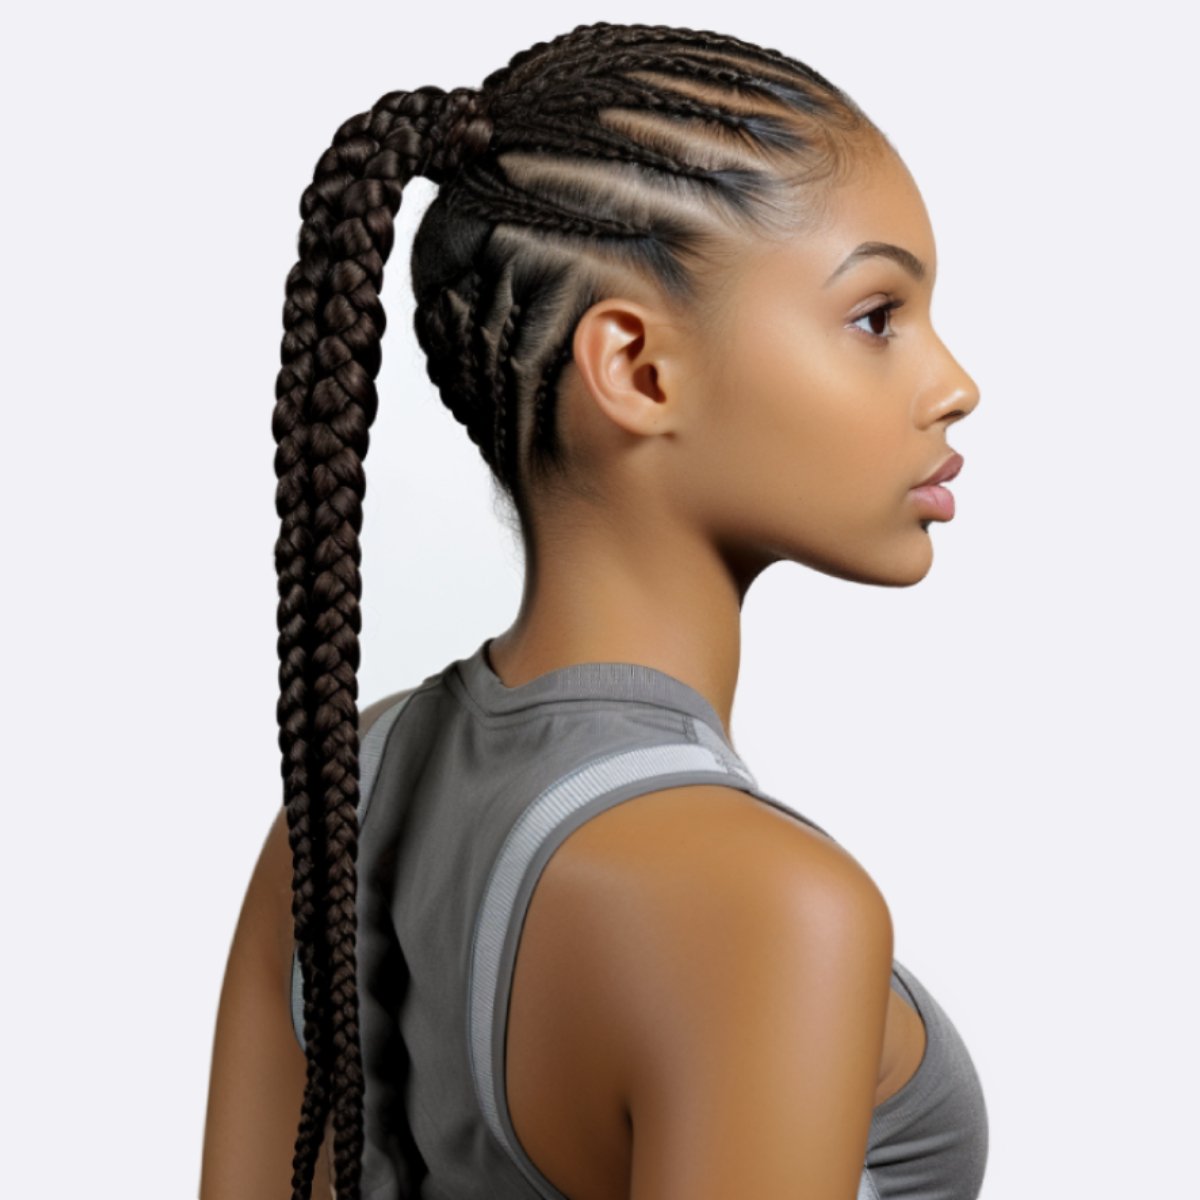 5 Braided Hairstyles for the Gym | VALLEY Magazine